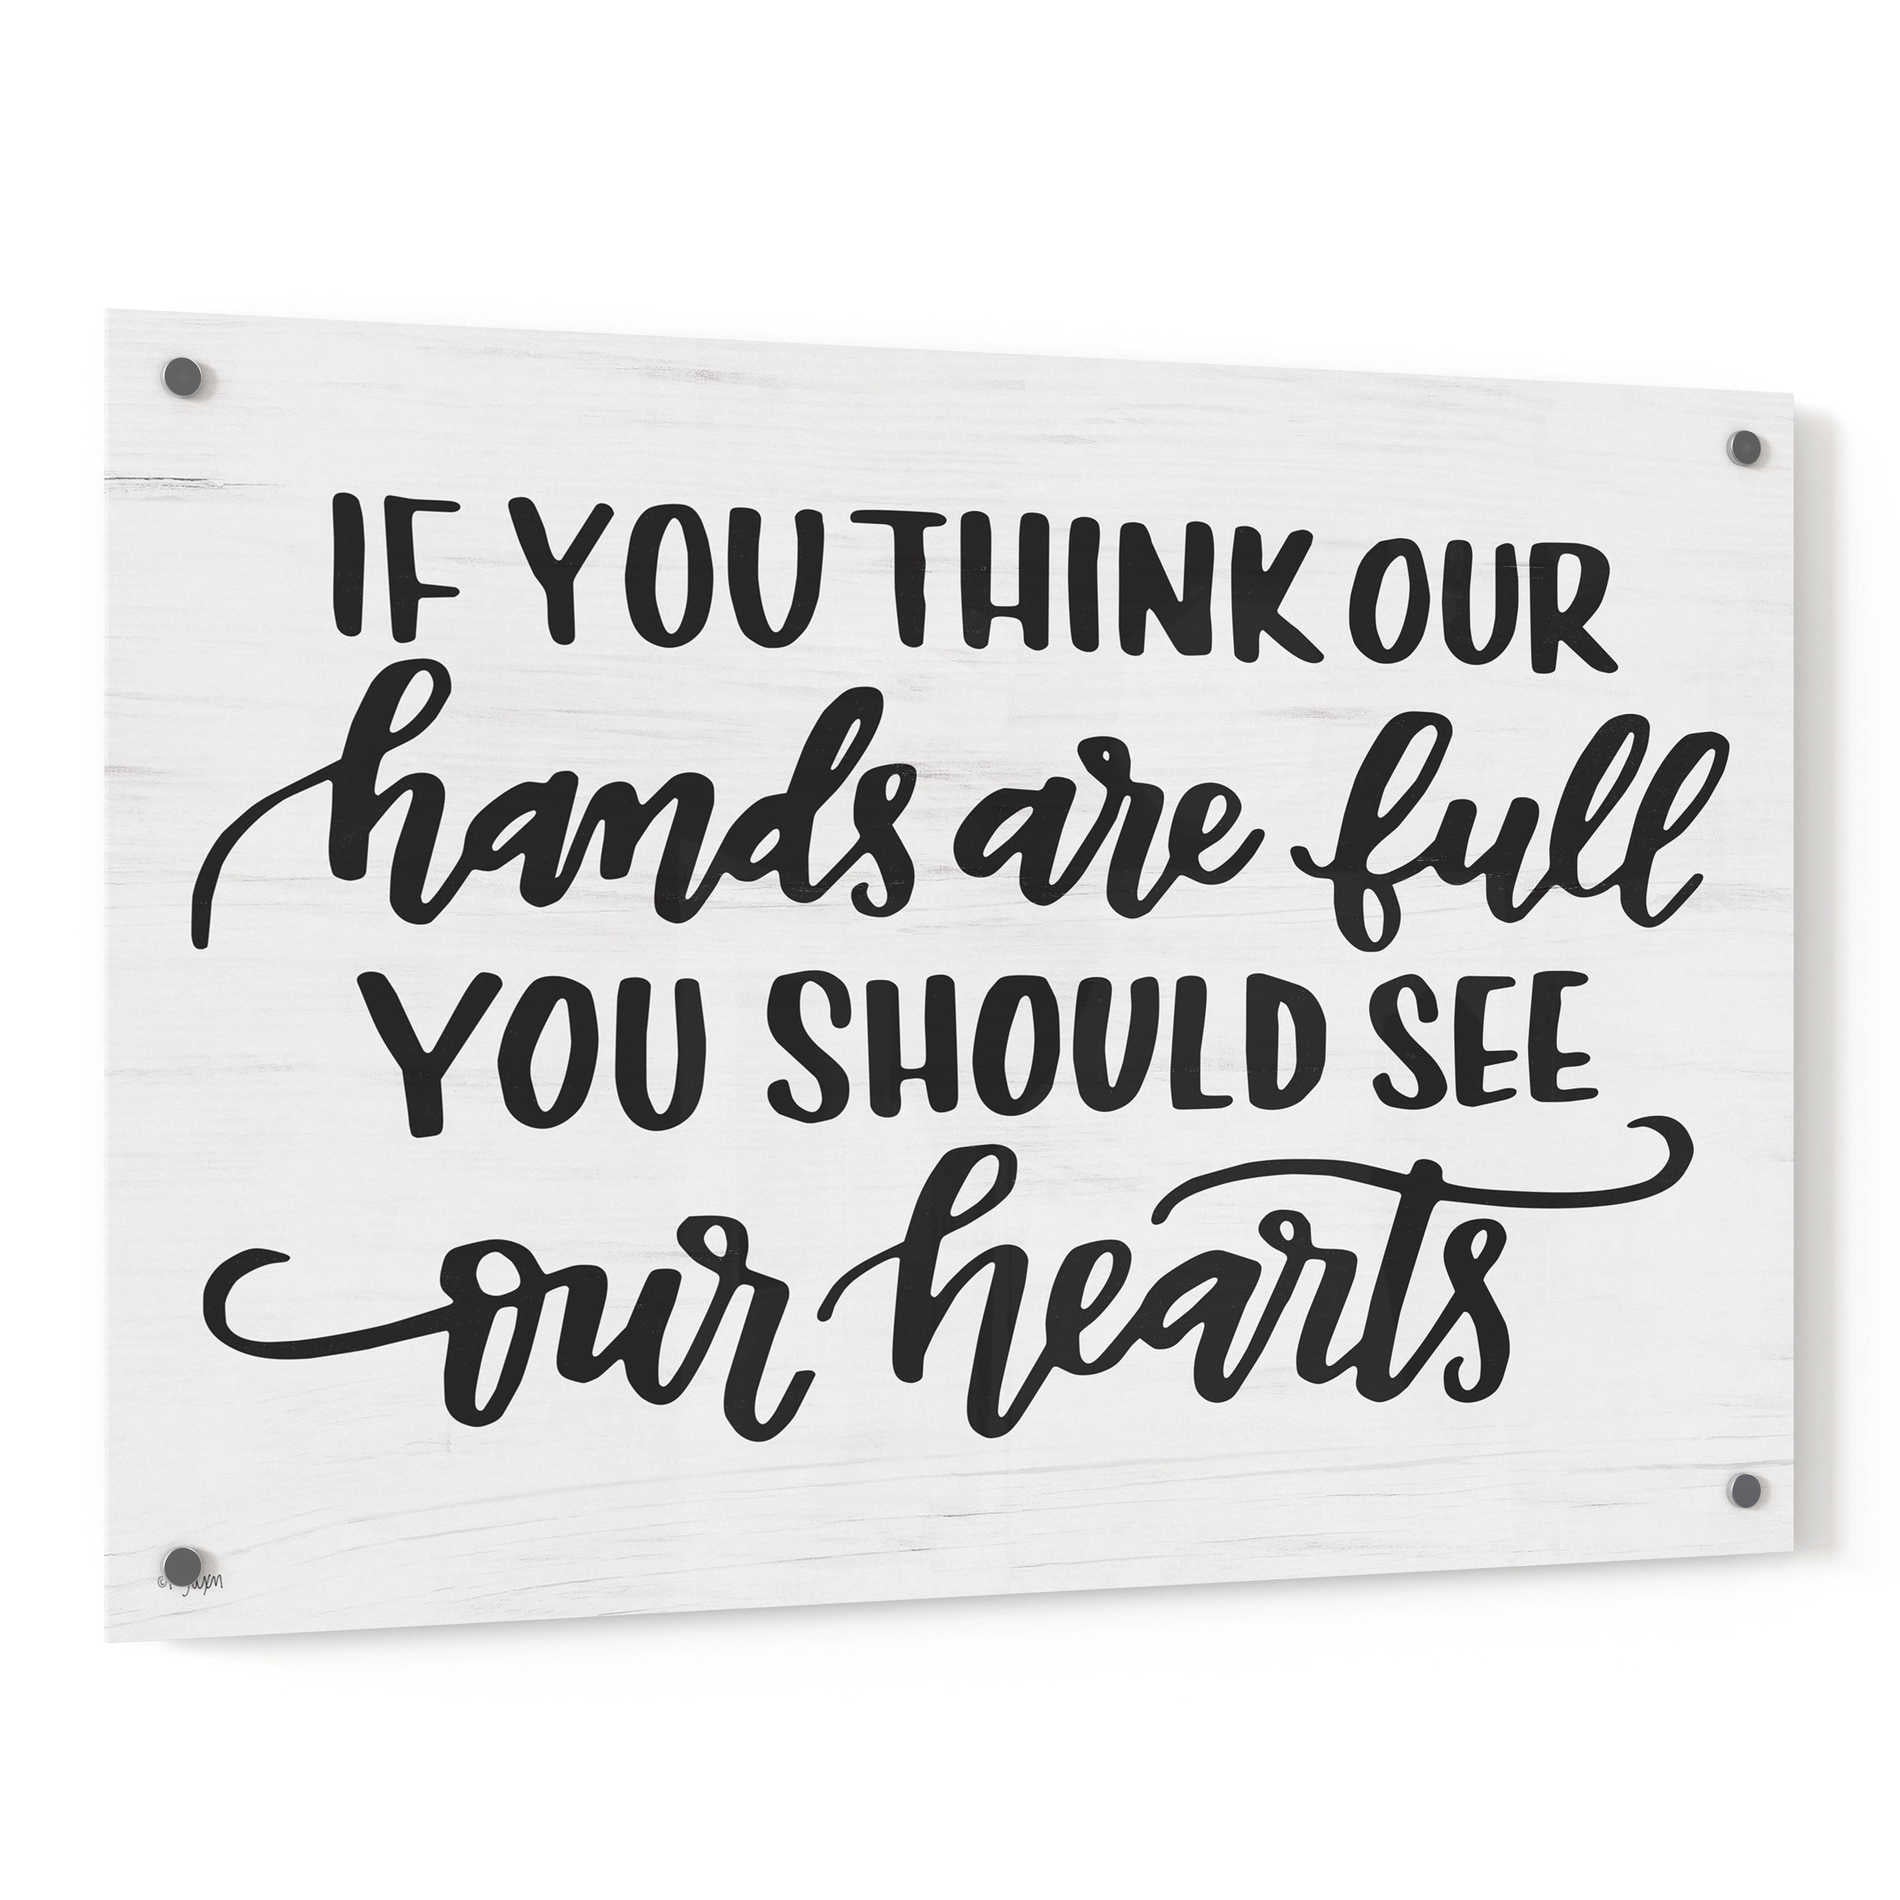 Epic Art 'Our Hearts' by Jaxn Blvd, Acrylic Glass Wall Art,36x24